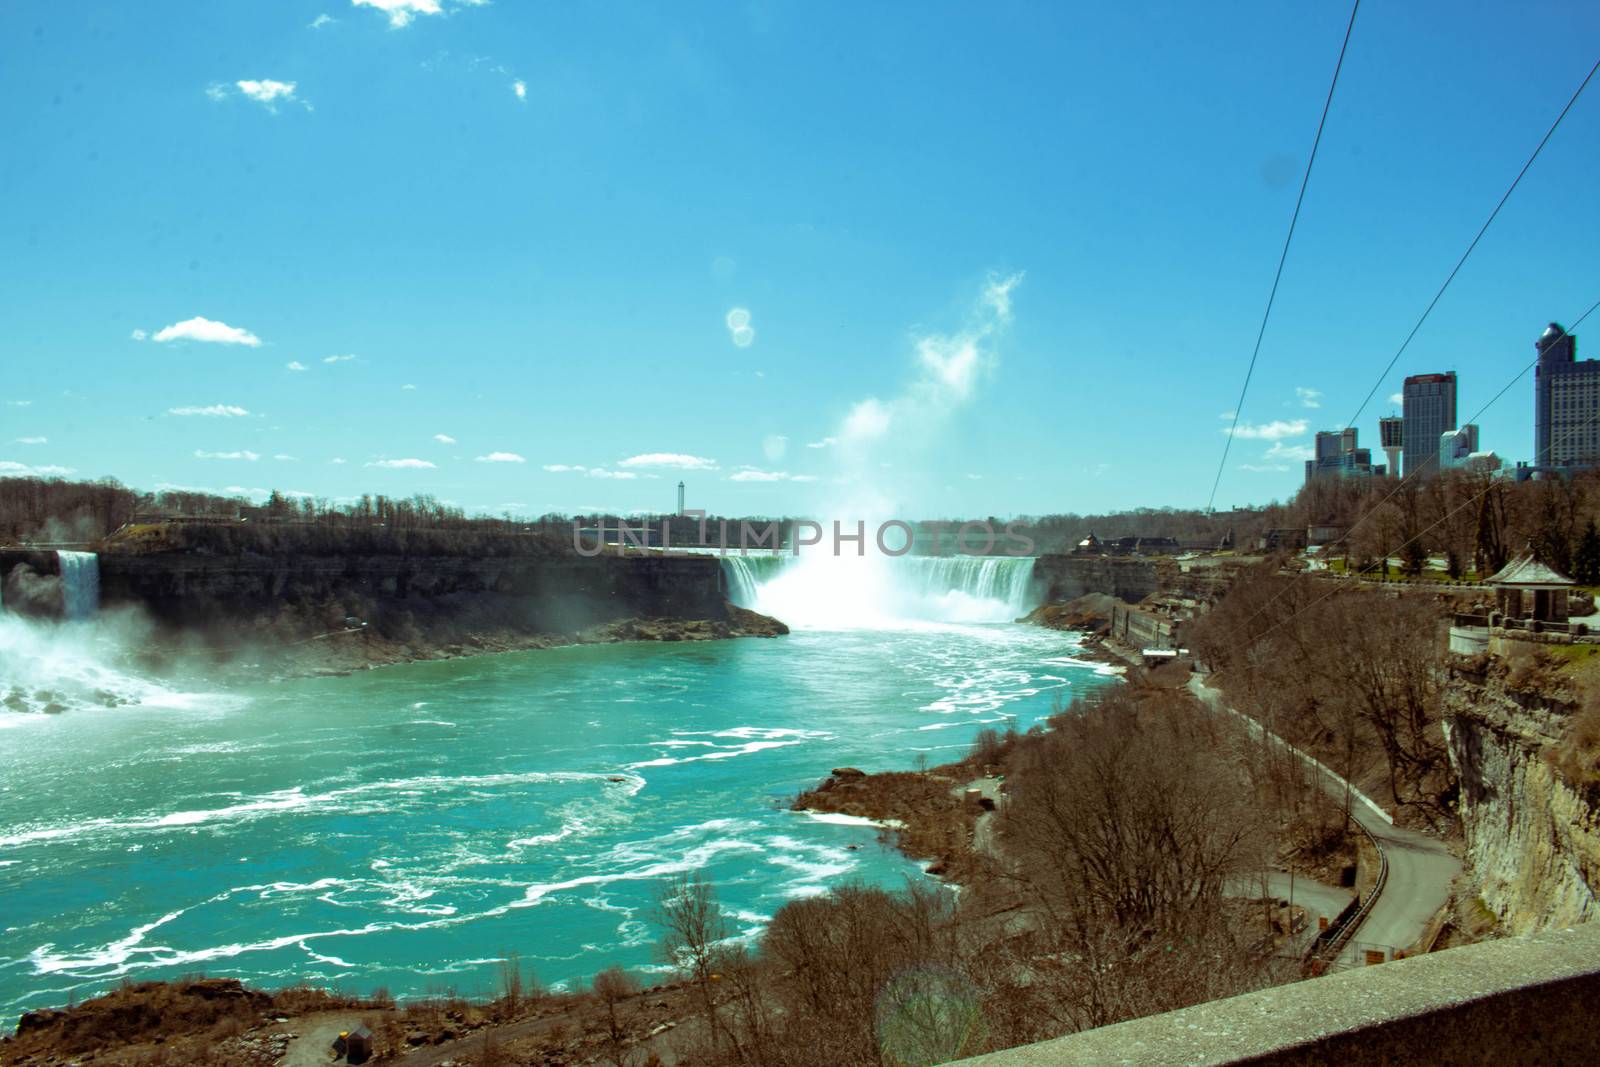 View of Niagara waterfalls during sunrise from Canada side.